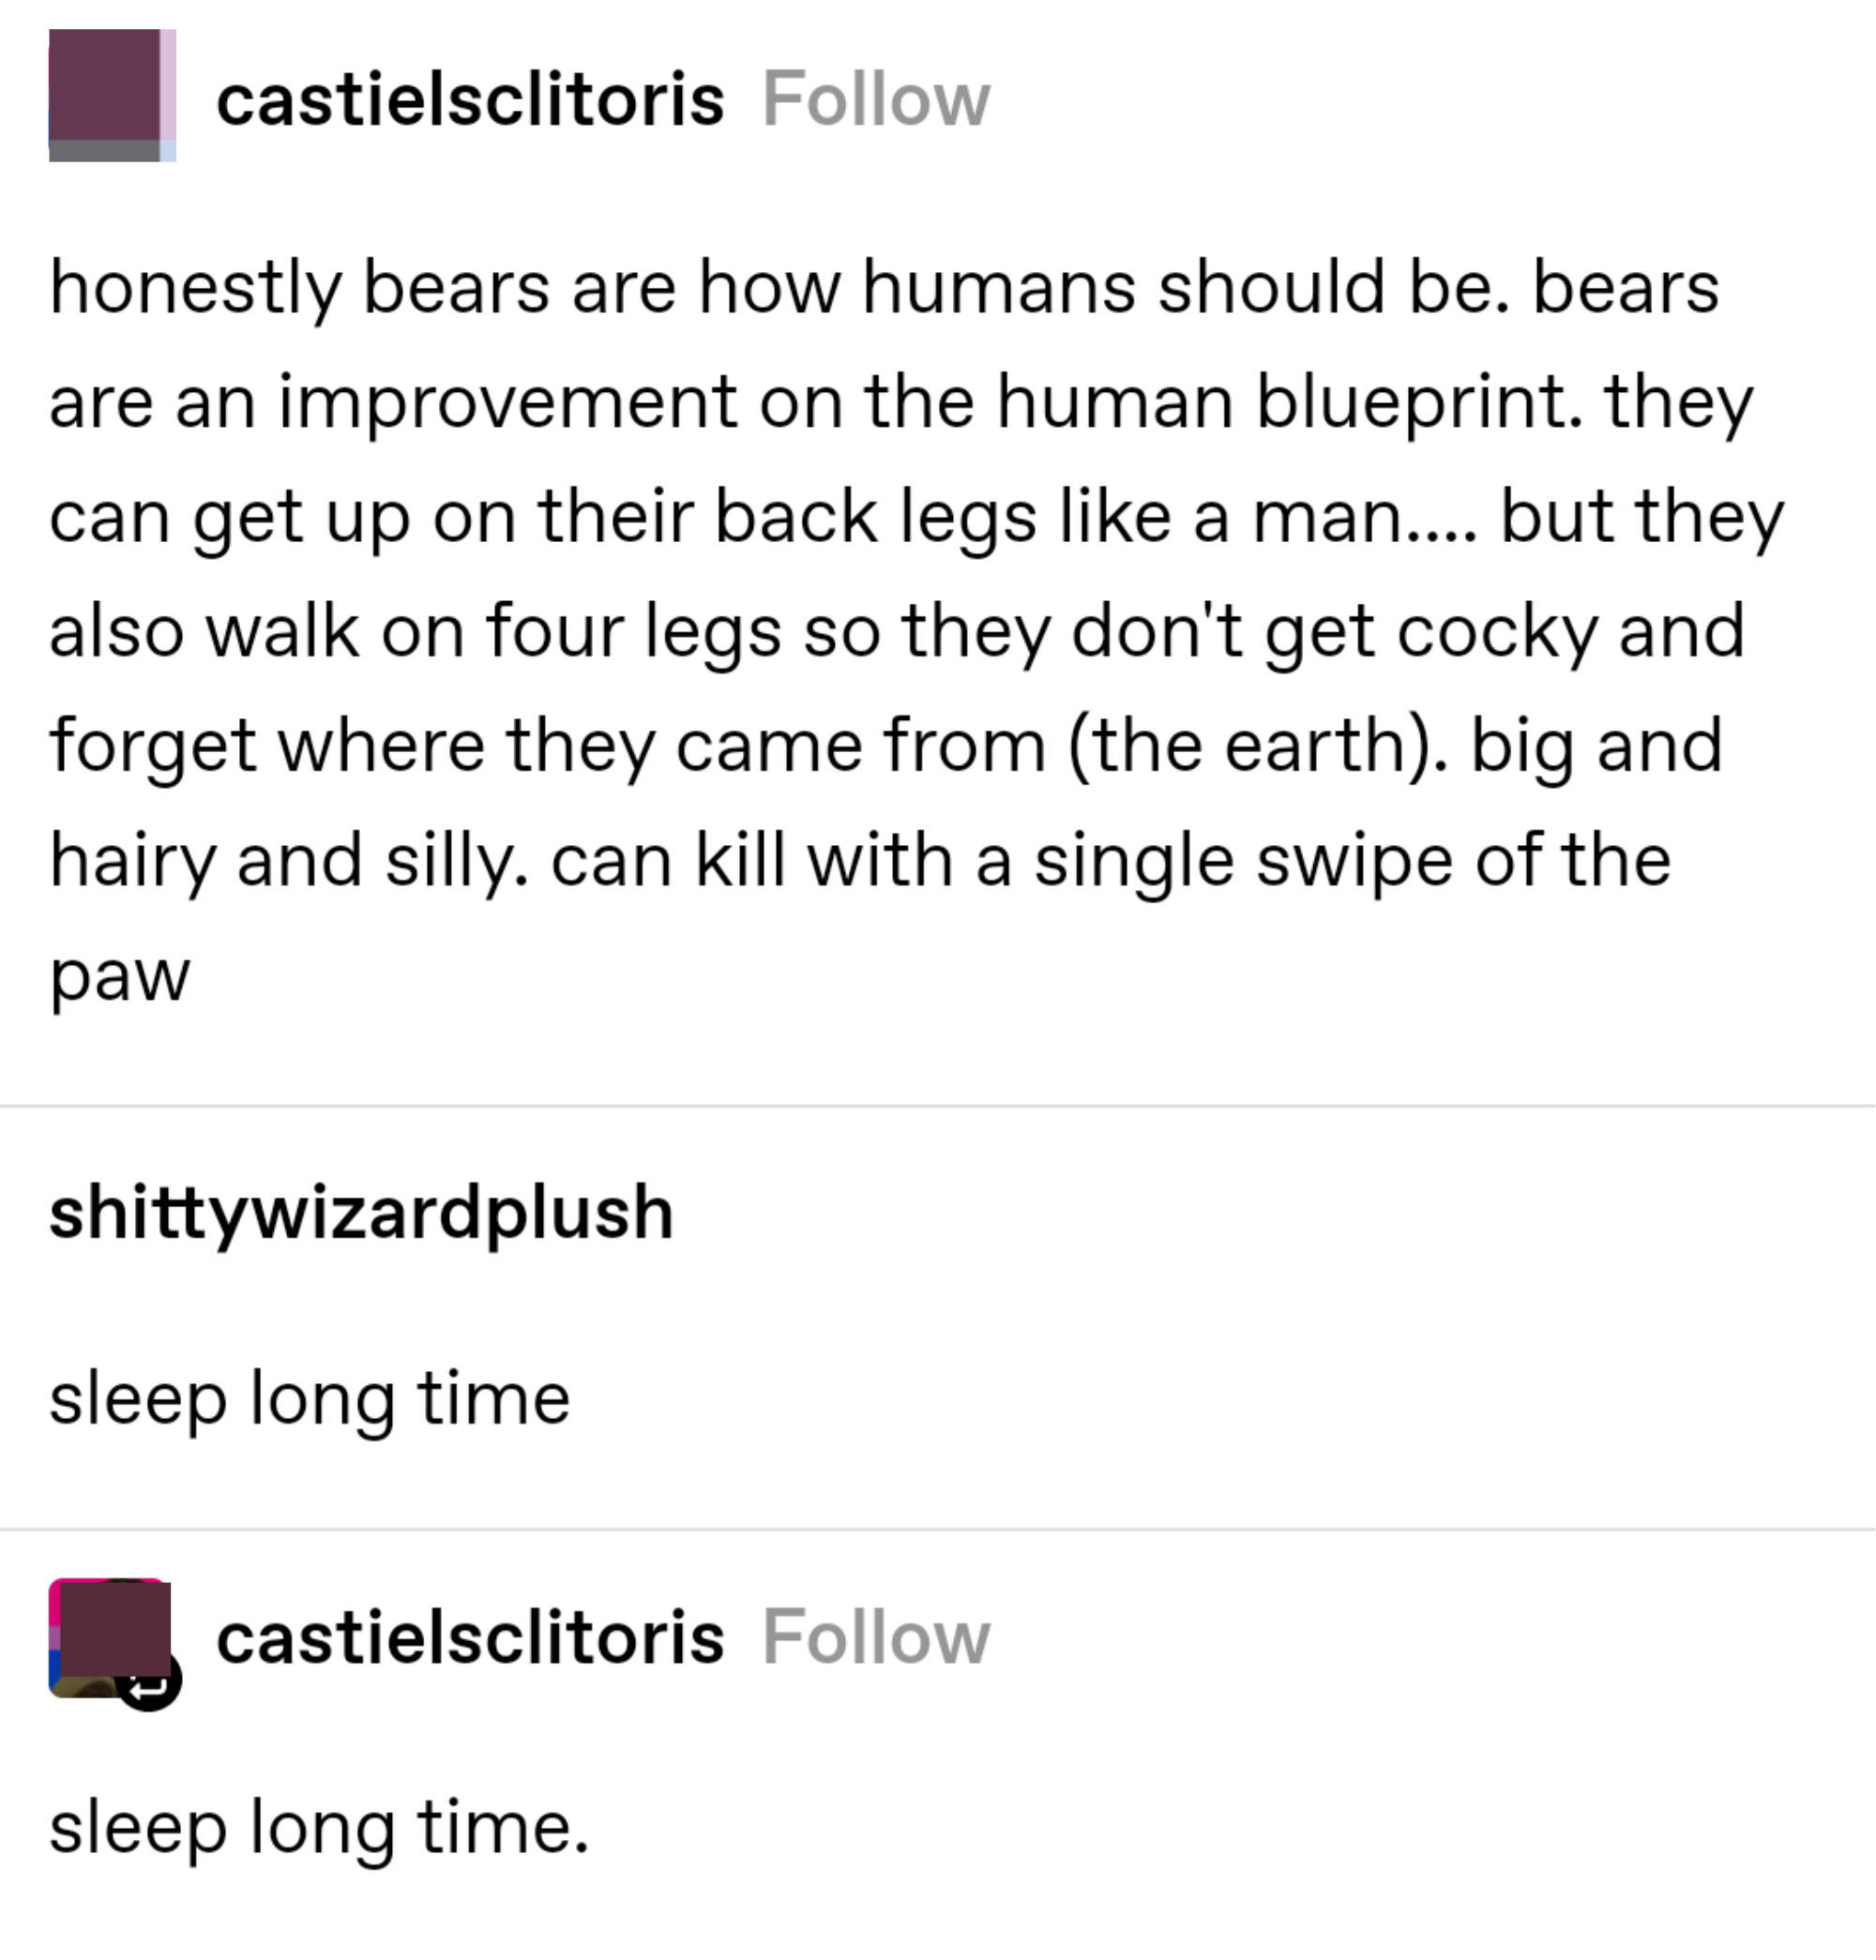 Person says bears are how humans should be because they can get on their back legs and walk on all fours so they don&#x27;t get cocky and forget where they came from, kill with a single swipe of the paw, and &quot;sleep long time&quot; (which someone repeats)